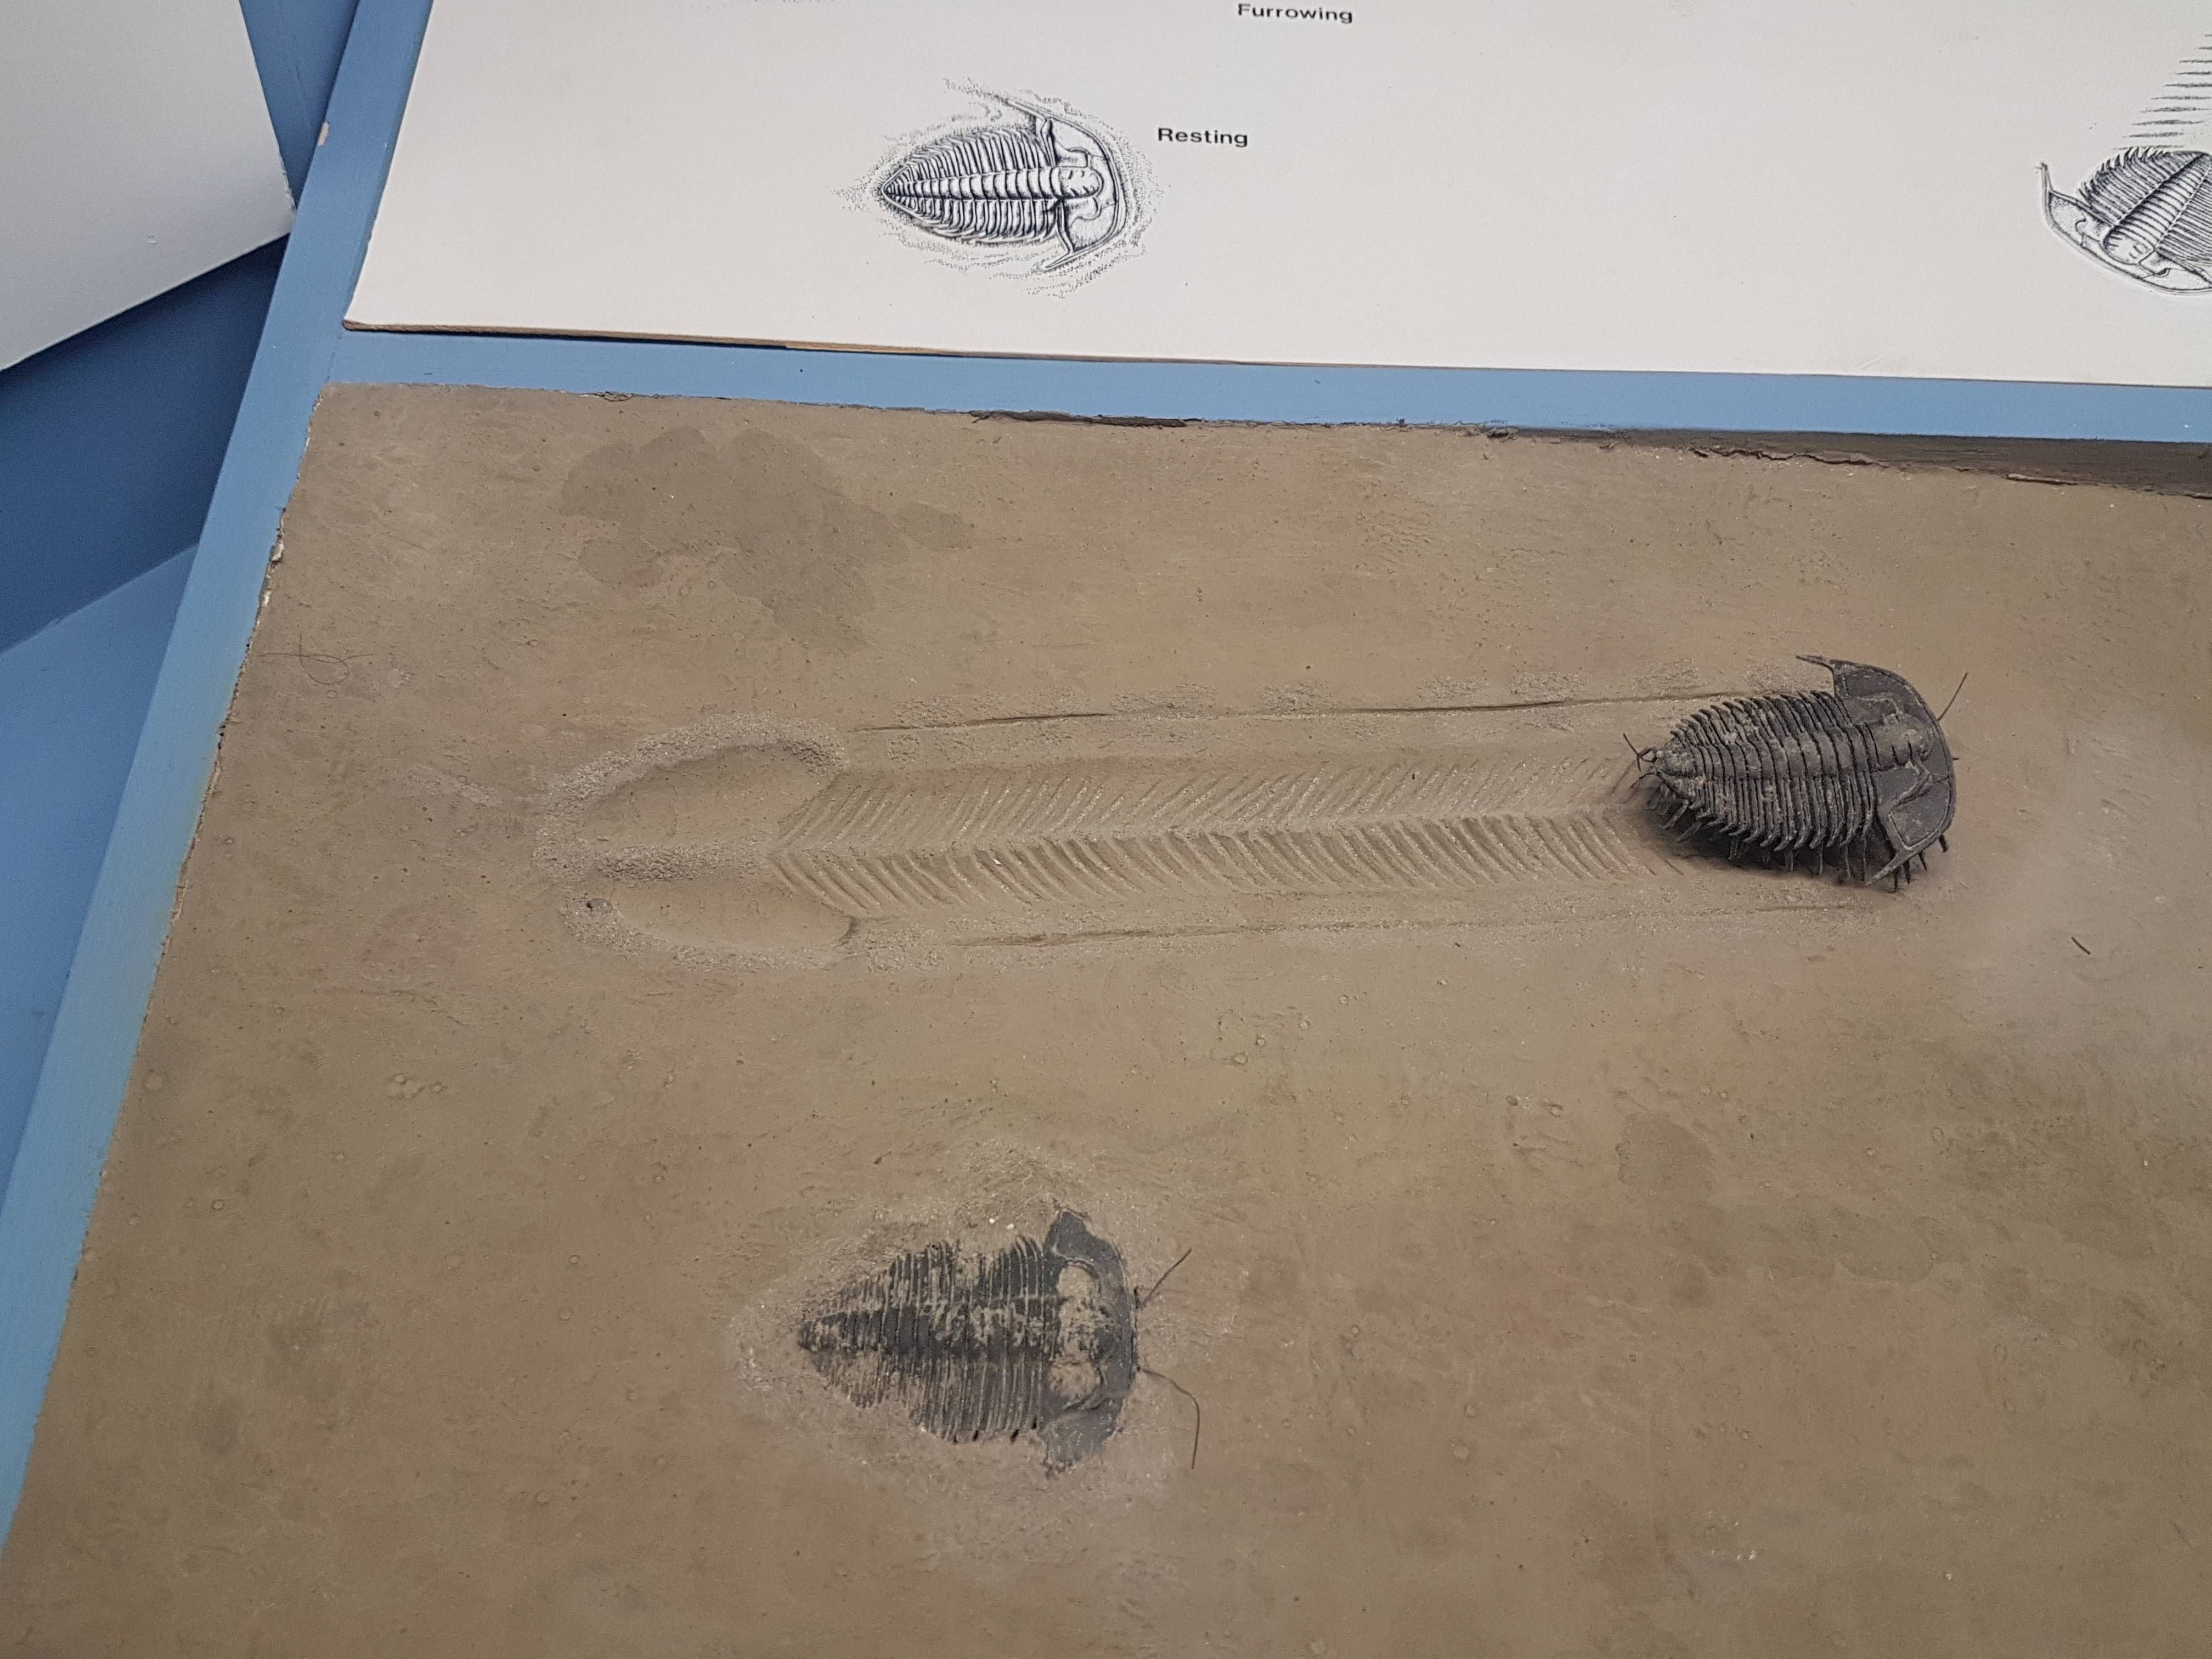 This Trilobite walked 6 inches 600 million years ago to send us all a dick pic